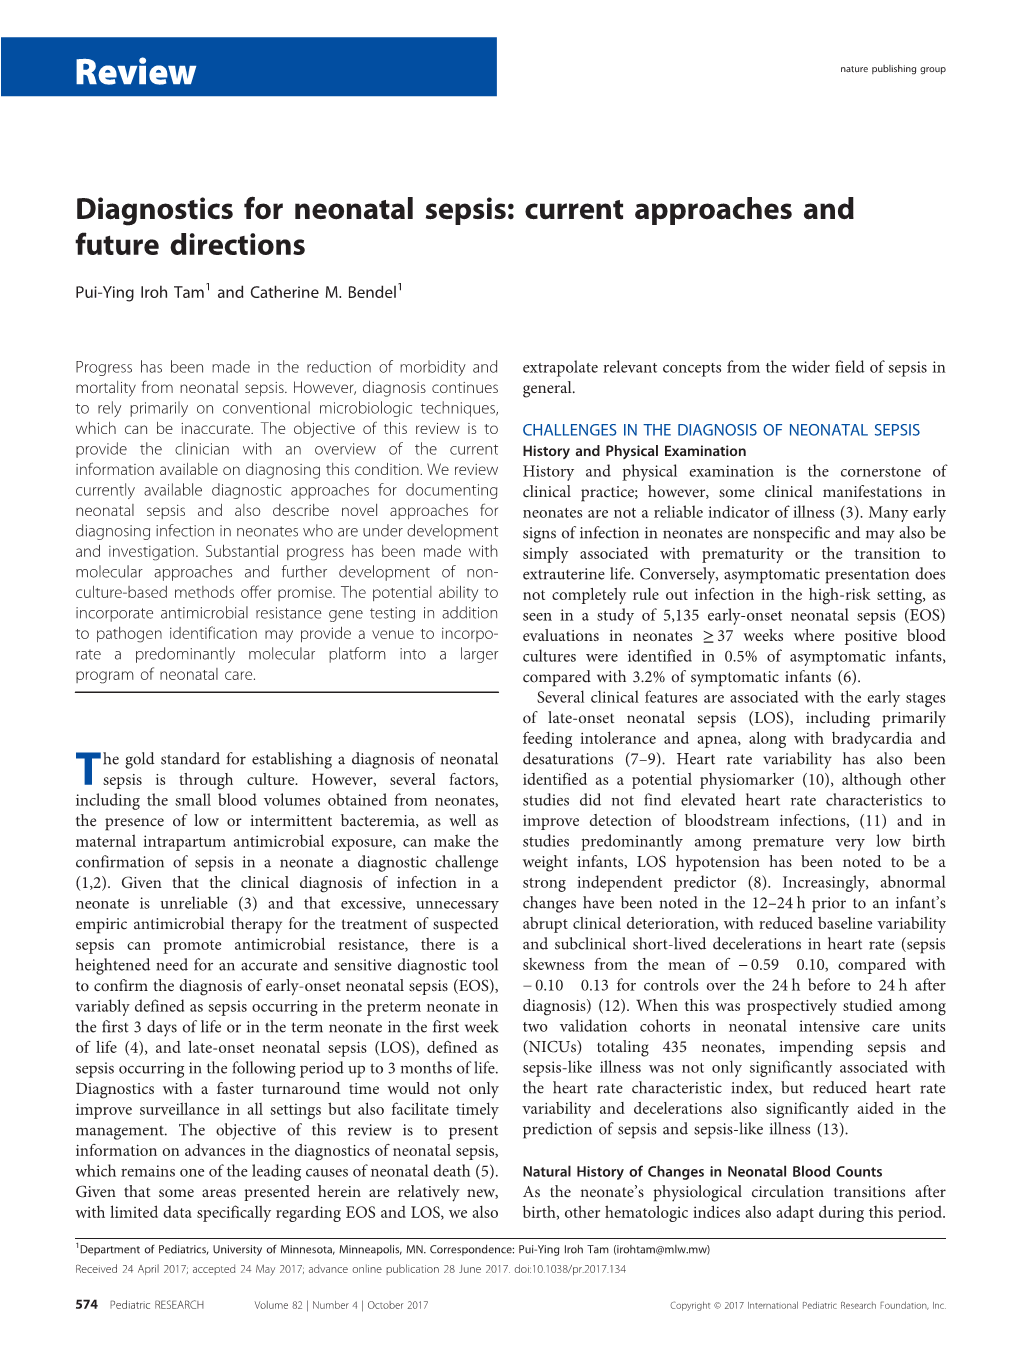 Diagnostics for Neonatal Sepsis: Current Approaches and Future Directions